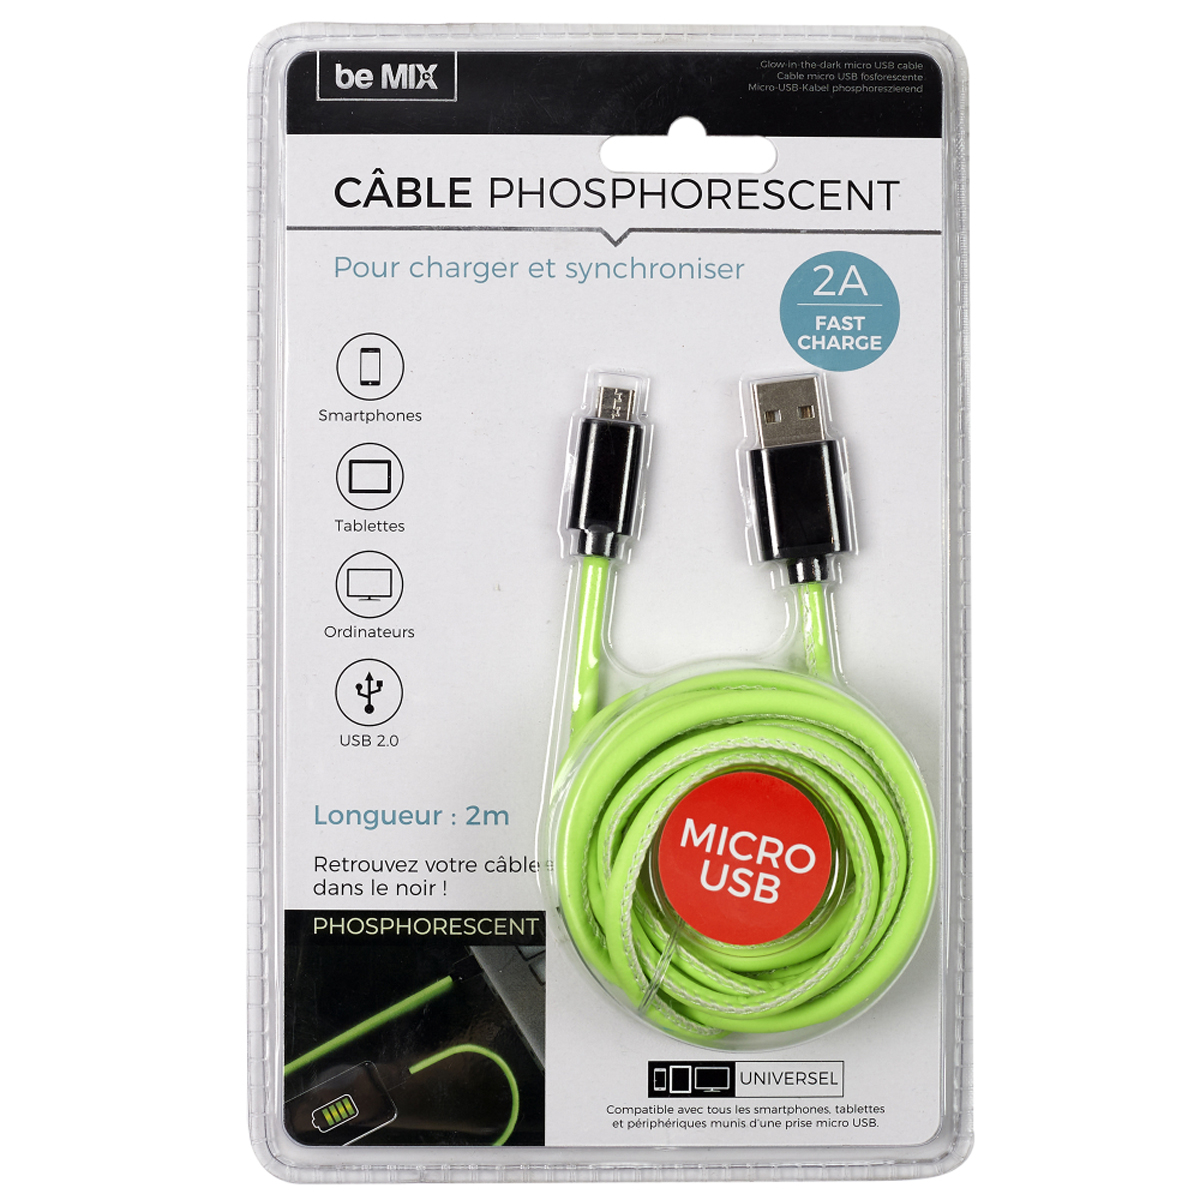 Cable de charge rapide 2A micro Android USB, phosphorescent - 2 m - [A1222]